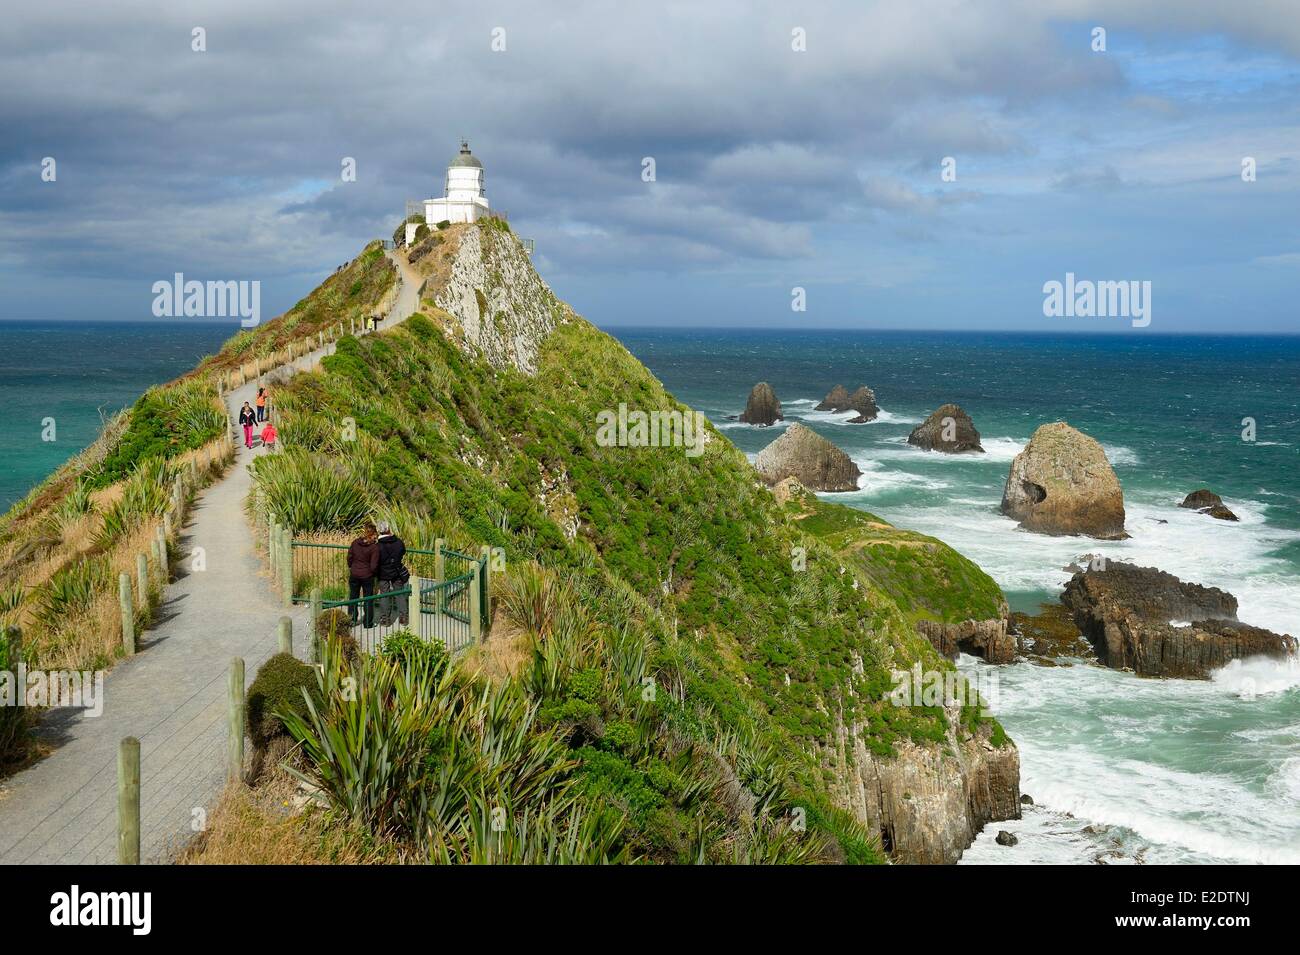 New Zealand South island the Catlins off the beaten trails along the south coast rocky outcrop at Nugget Point Lighthouse with Stock Photo